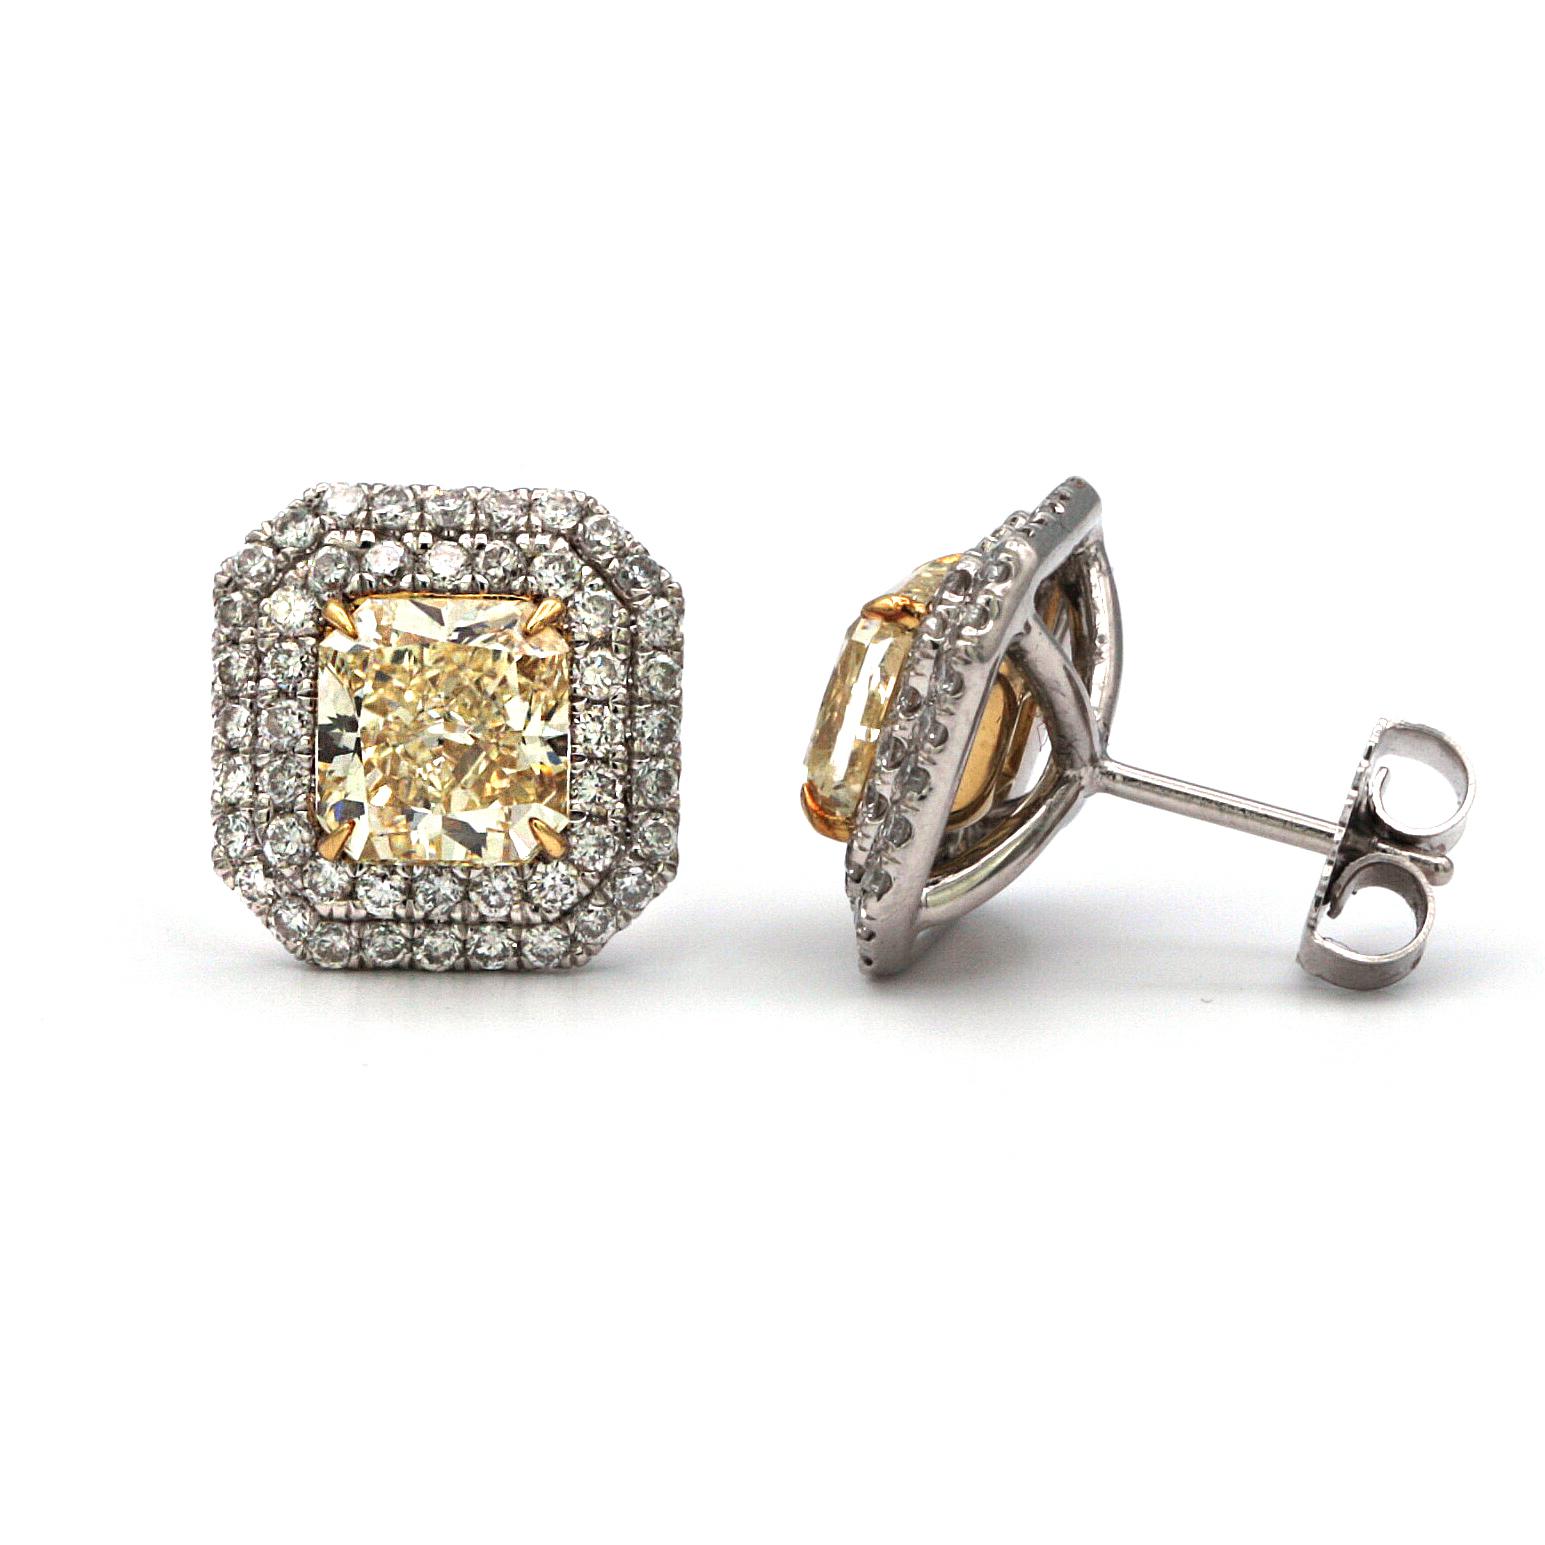 These stunning custom-made platinum diamond stud earrings feature two radiant shape Canary yellow diamonds weighing 4.10 carats.. The center diamonds have a double row halo of white diamonds of 1.12 carats.